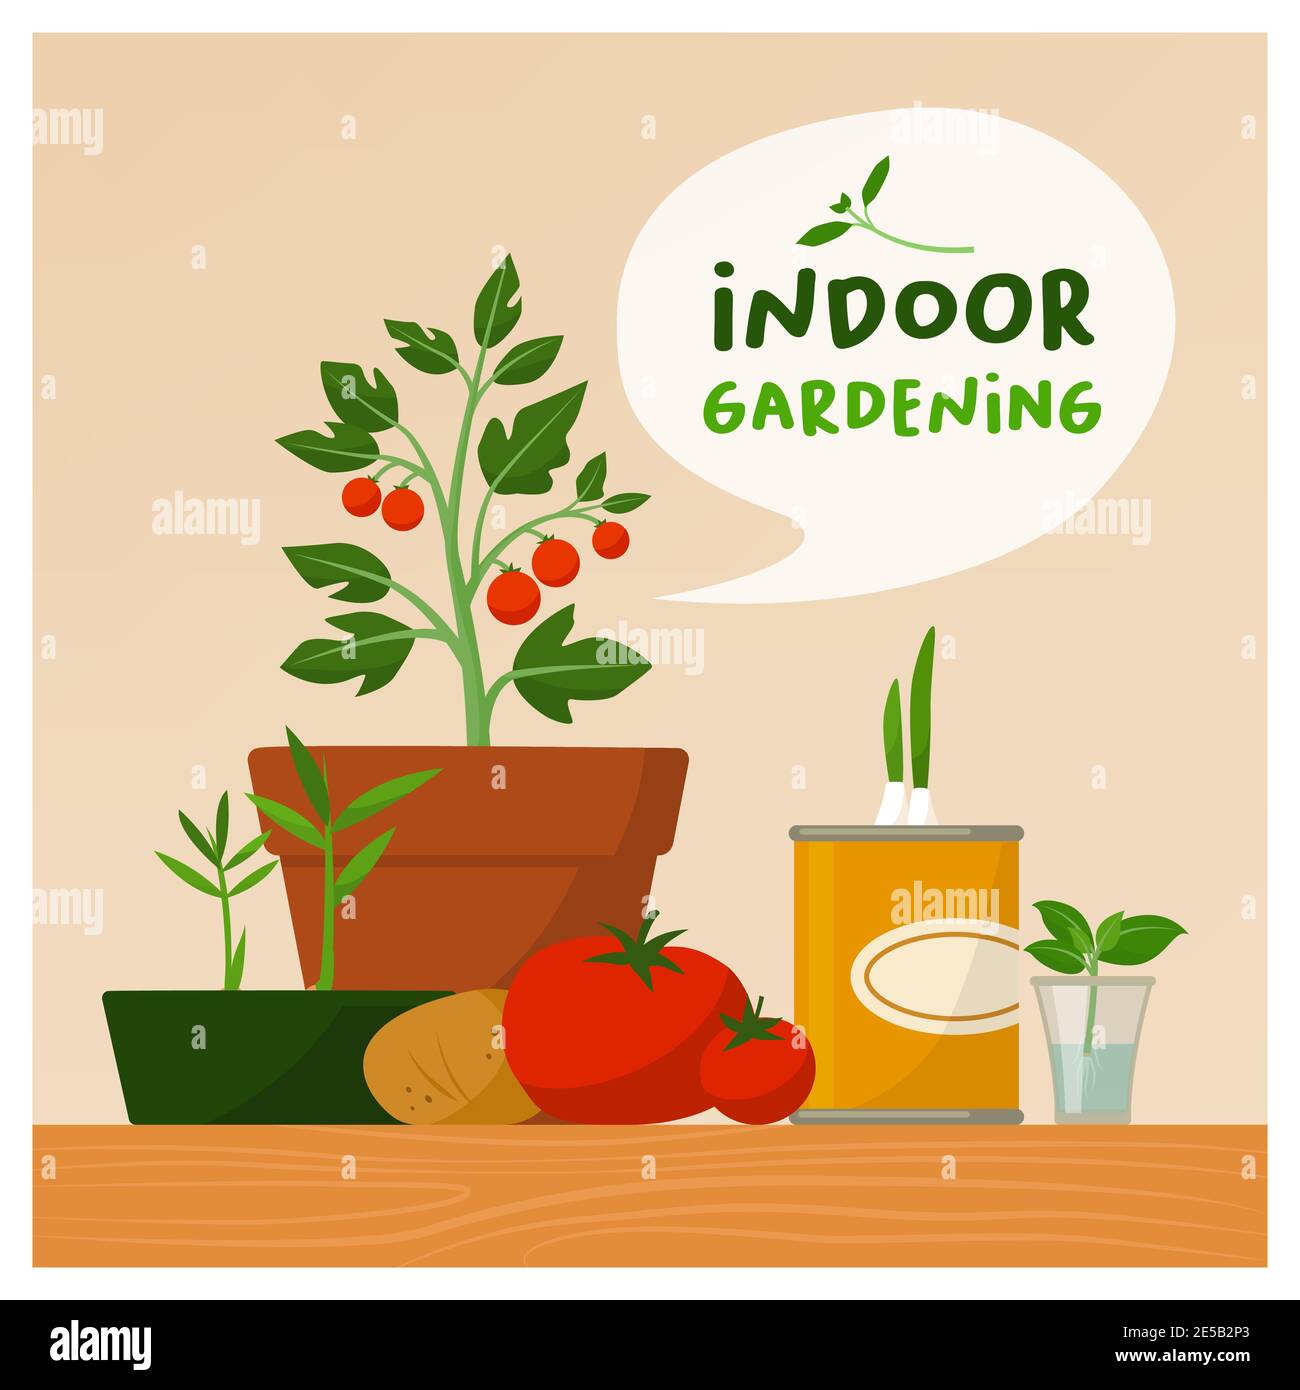 Indoor garening and sustainable lifestyle: home grown plants and vegetables Stock Vector